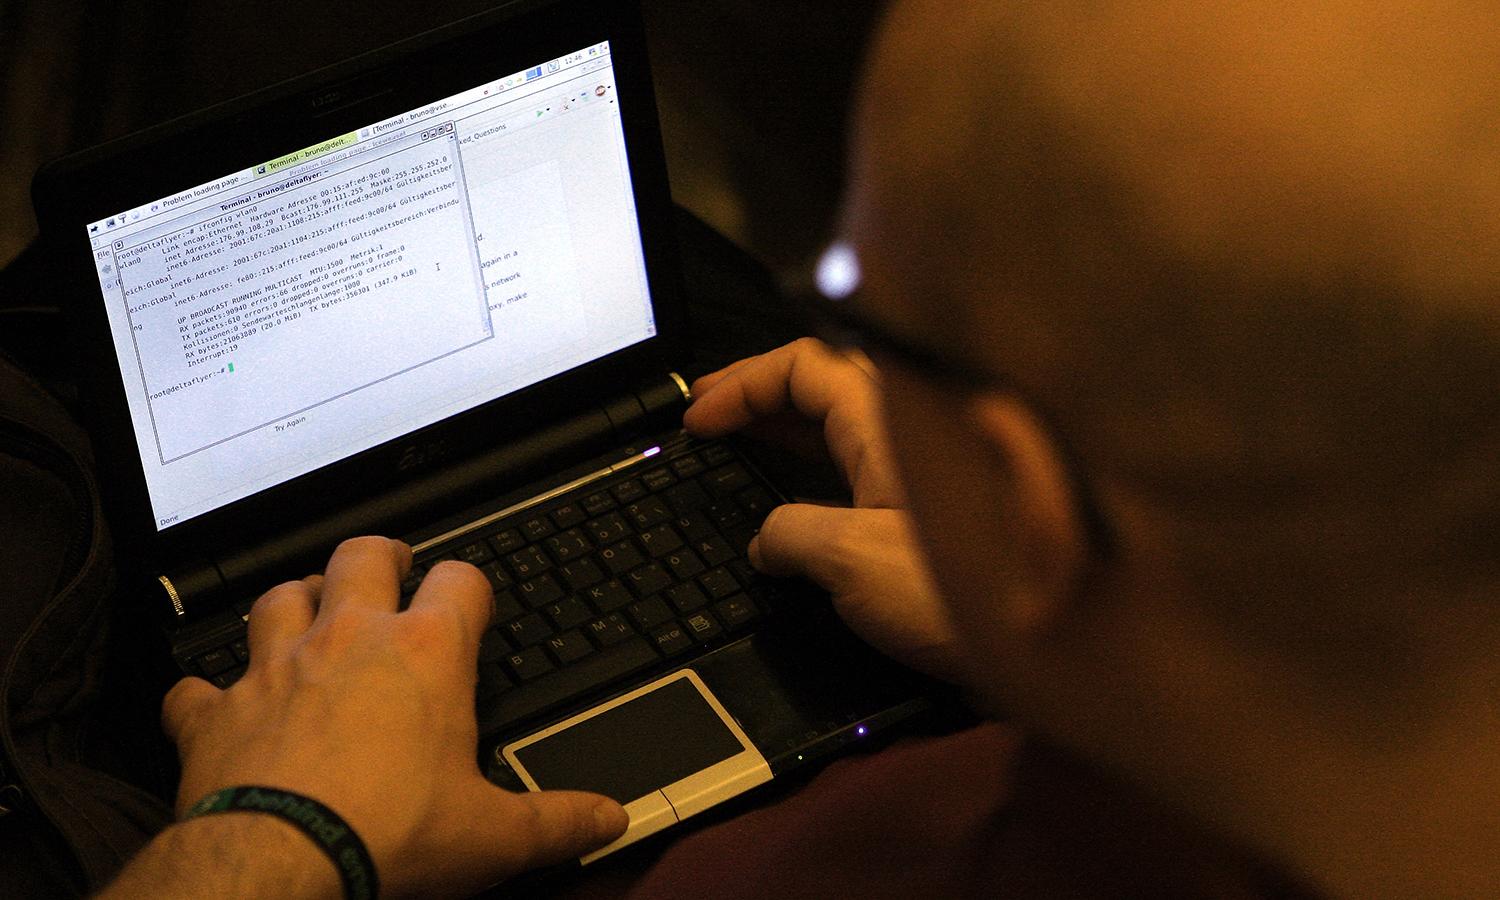 A participant looks at lines of code on a laptop on the first day of the 28th Chaos Communication Congress computer hacker conference on Dec. 27, 2011, in Berlin. (Photo by Adam Berry/Getty Images)